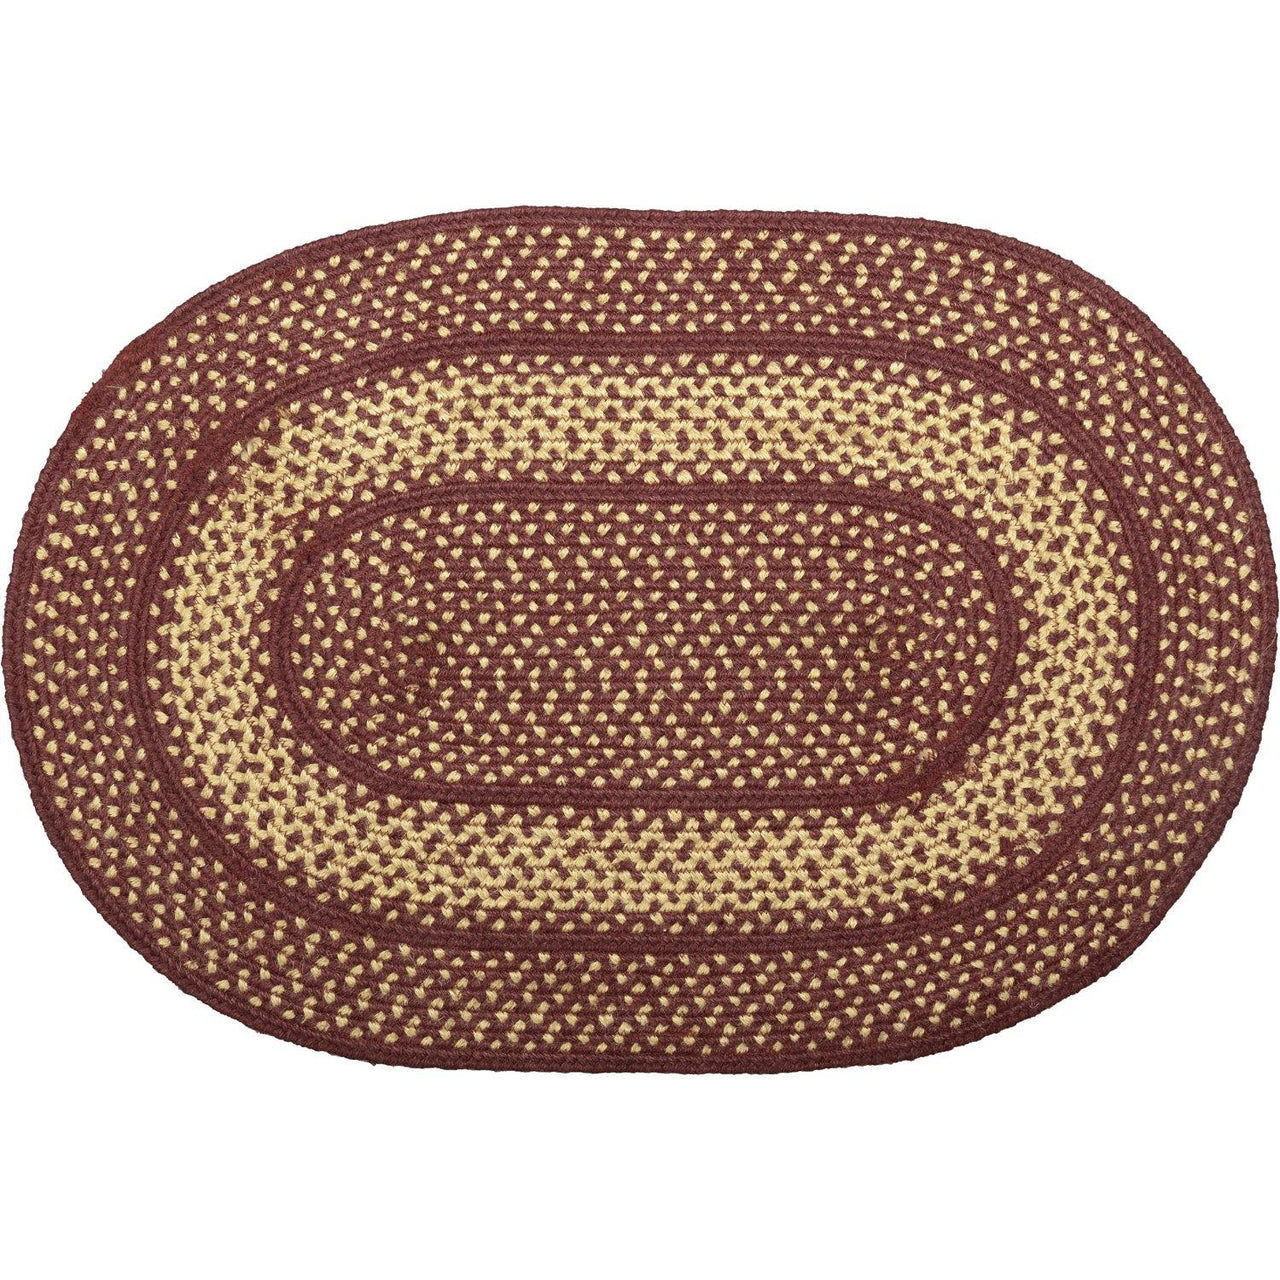 Burgundy Red Primitive Jute Braided Rug Oval 20"x30" with Rug Pad VHC Brands - The Fox Decor